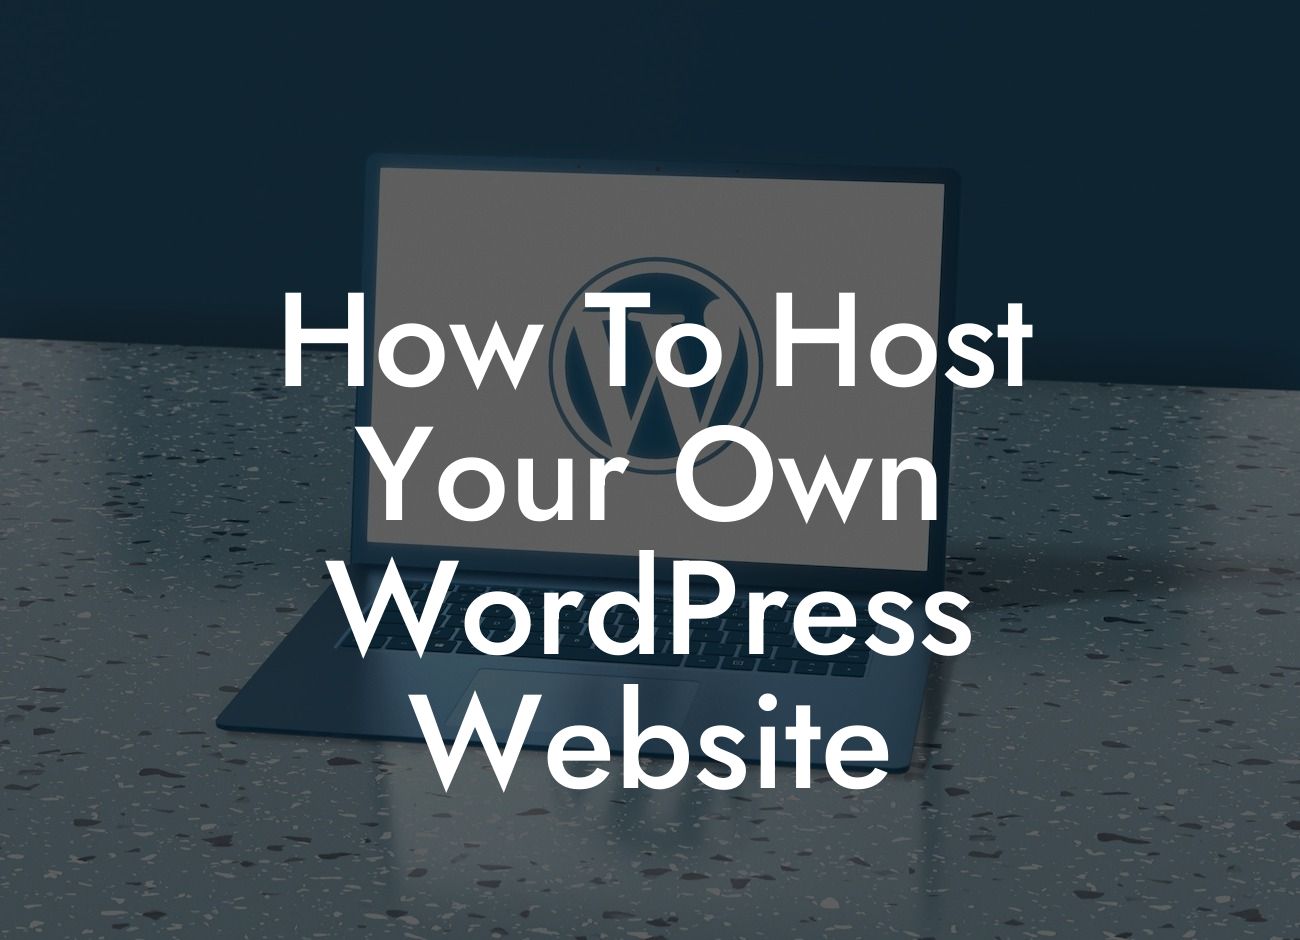 How To Host Your Own WordPress Website